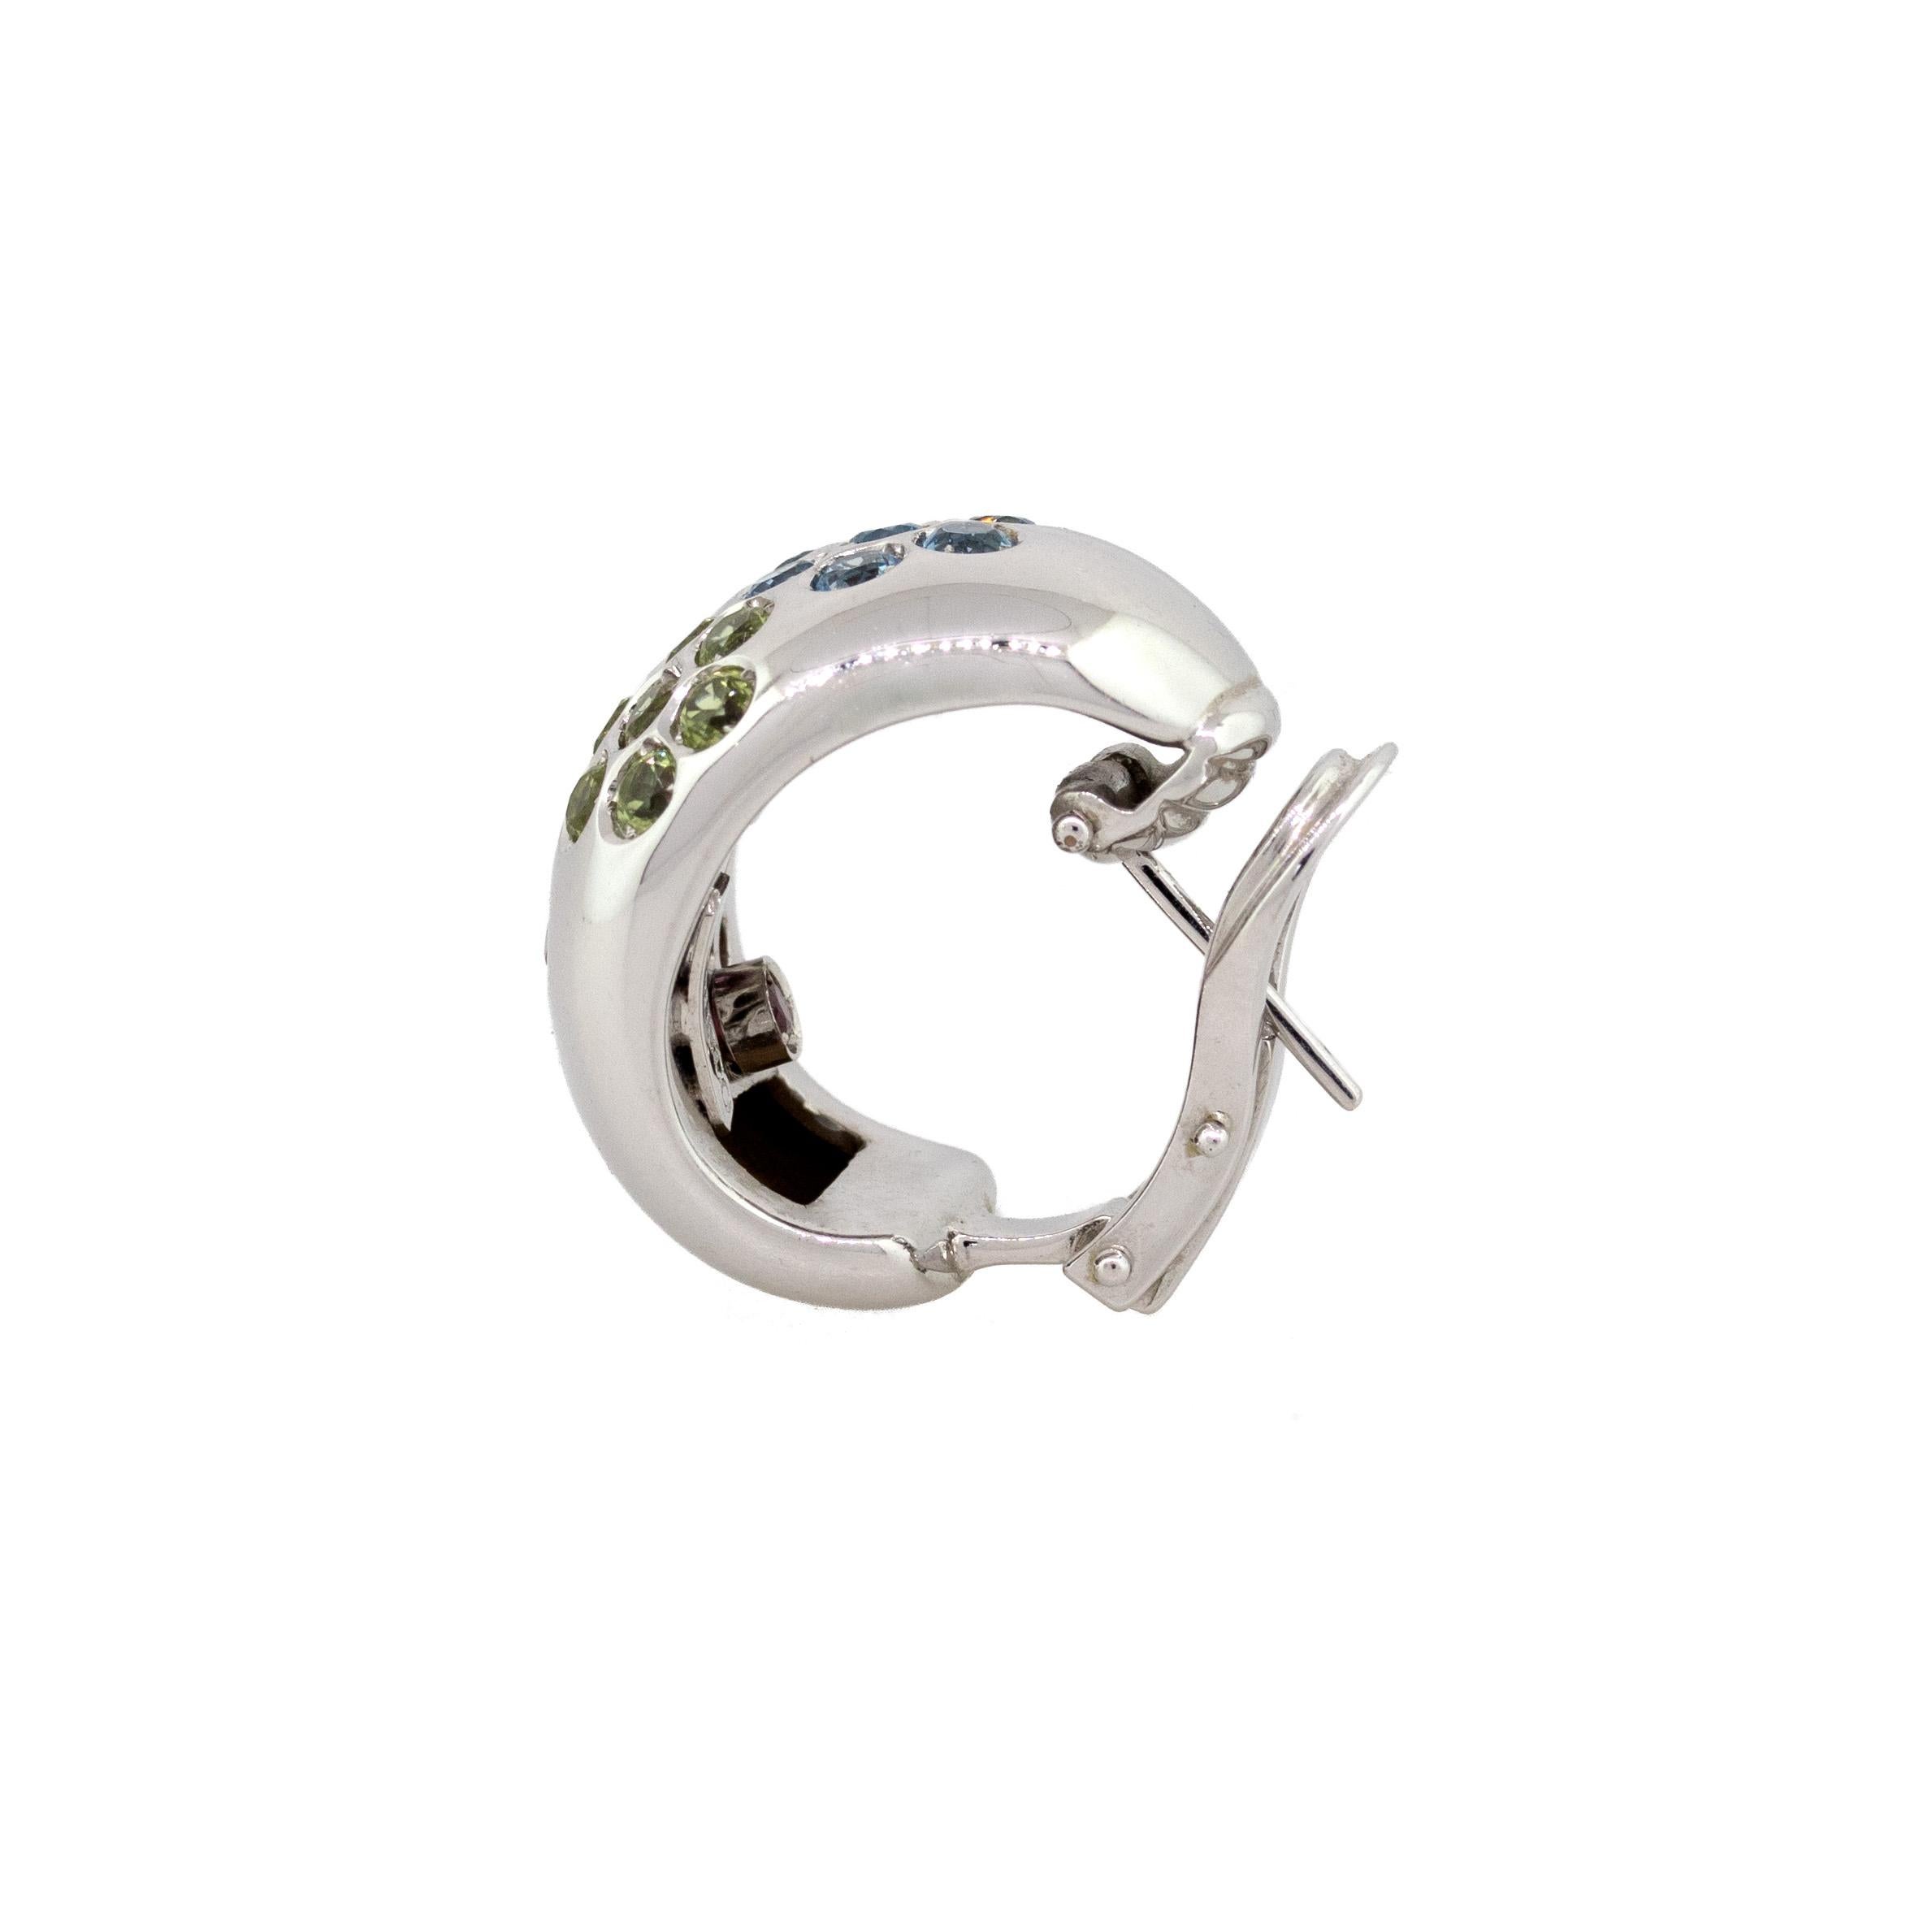 Material: 14k White Gold
Measurements: 0.51